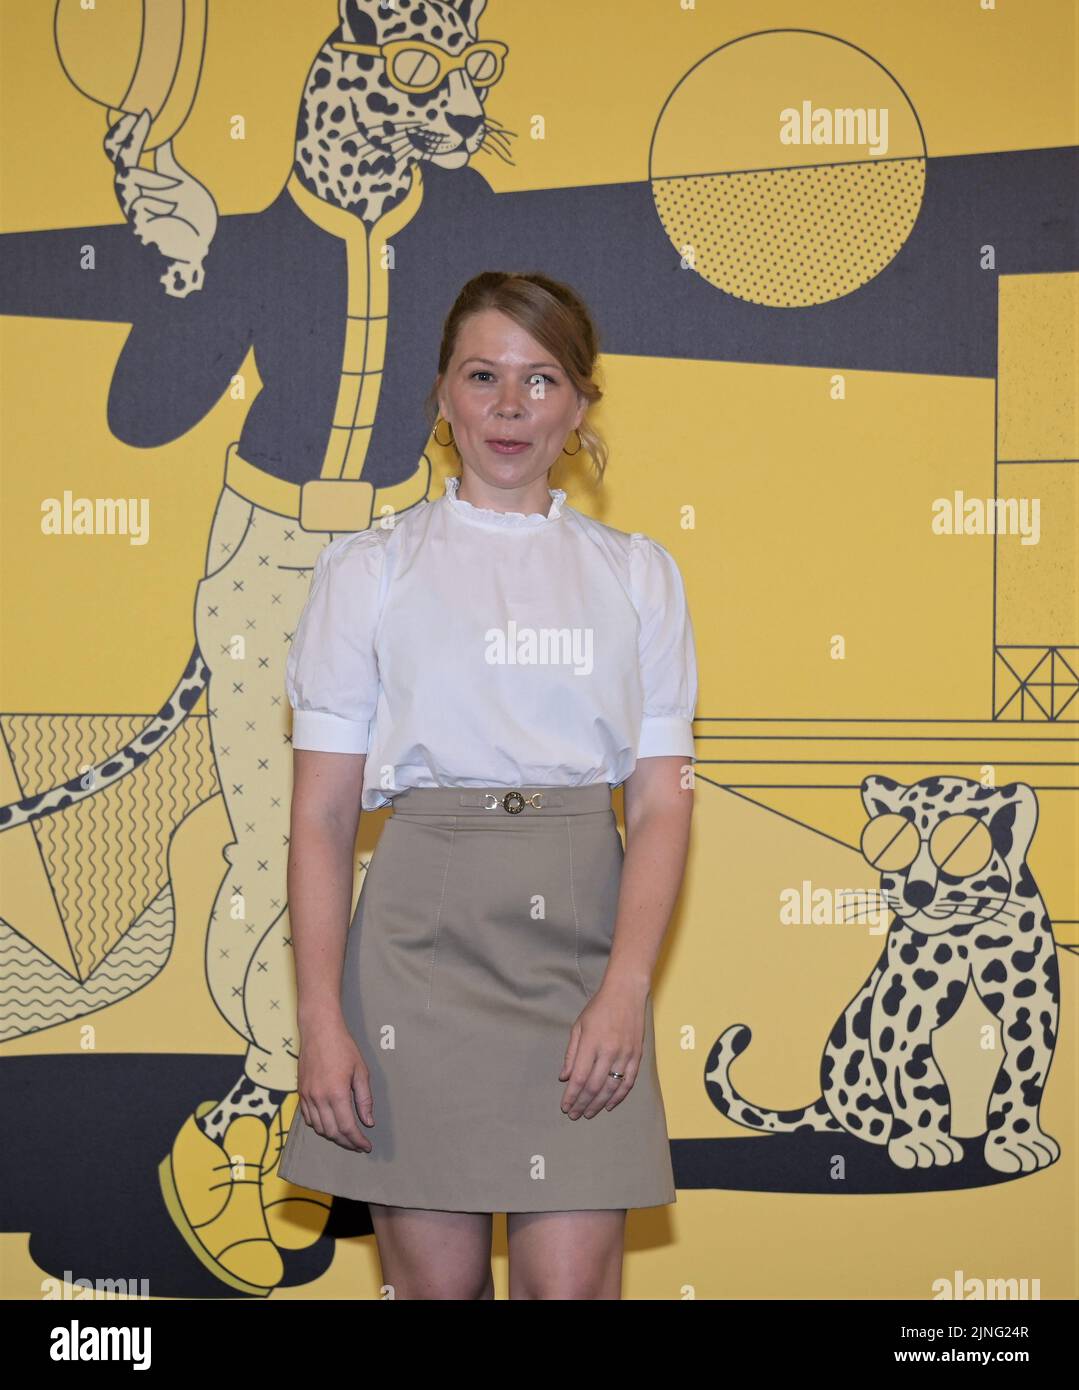 Locarno, Switzerland. 11th Aug, 2022. Locarno, Swiss Locarno Film Festival 2022 ANNIE COLERE photocall film cast, producer In the picture: India Hair actress Credit: Independent Photo Agency/Alamy Live News Stock Photo